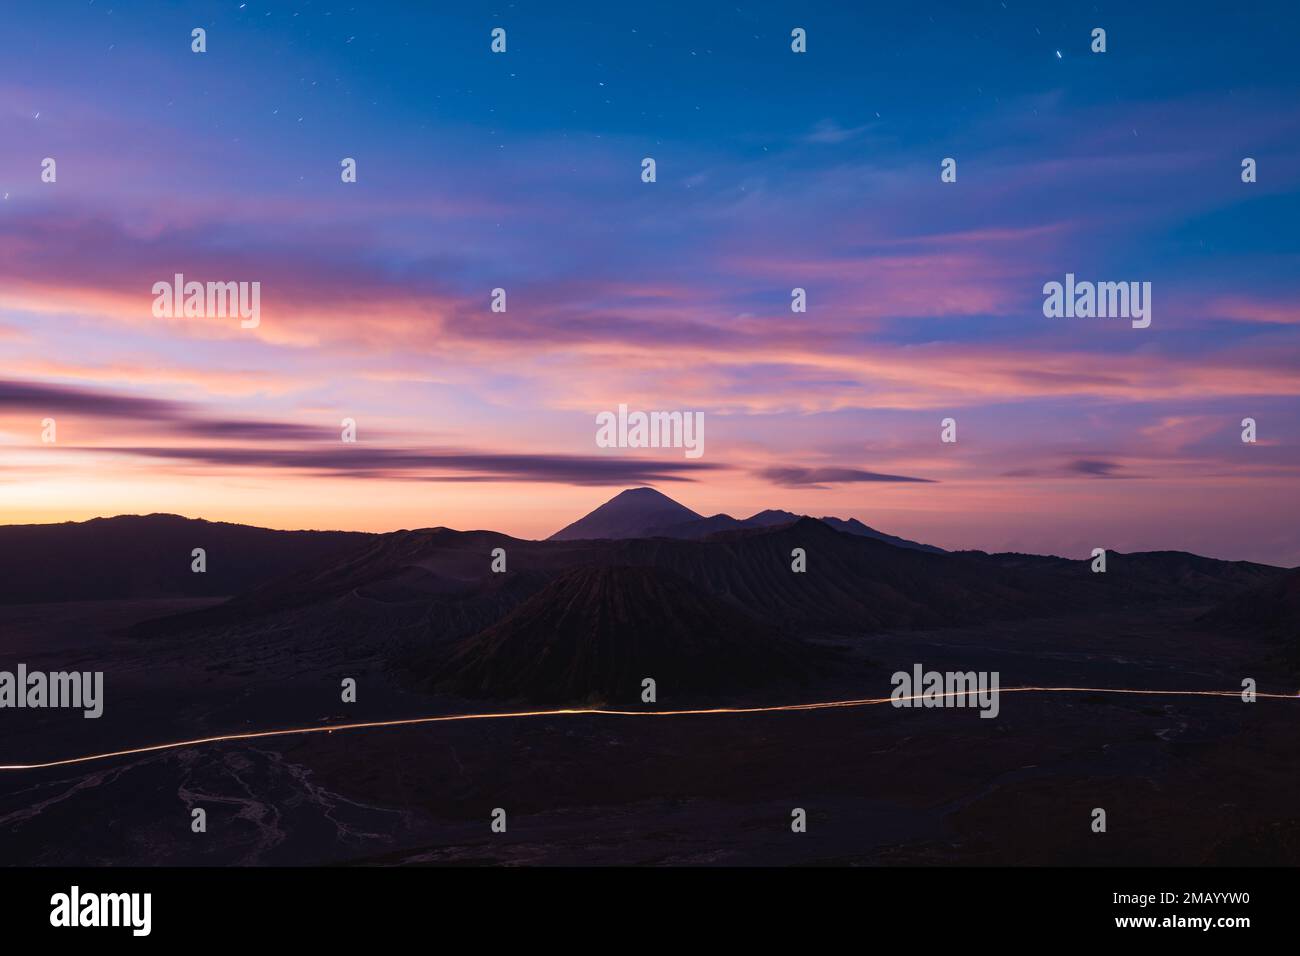 View from above, stunning panoramic view of the Mt Batok, Mt Bromo and the Mt Semeru in the distance illuminated during a dramatic sunrise. Stock Photo